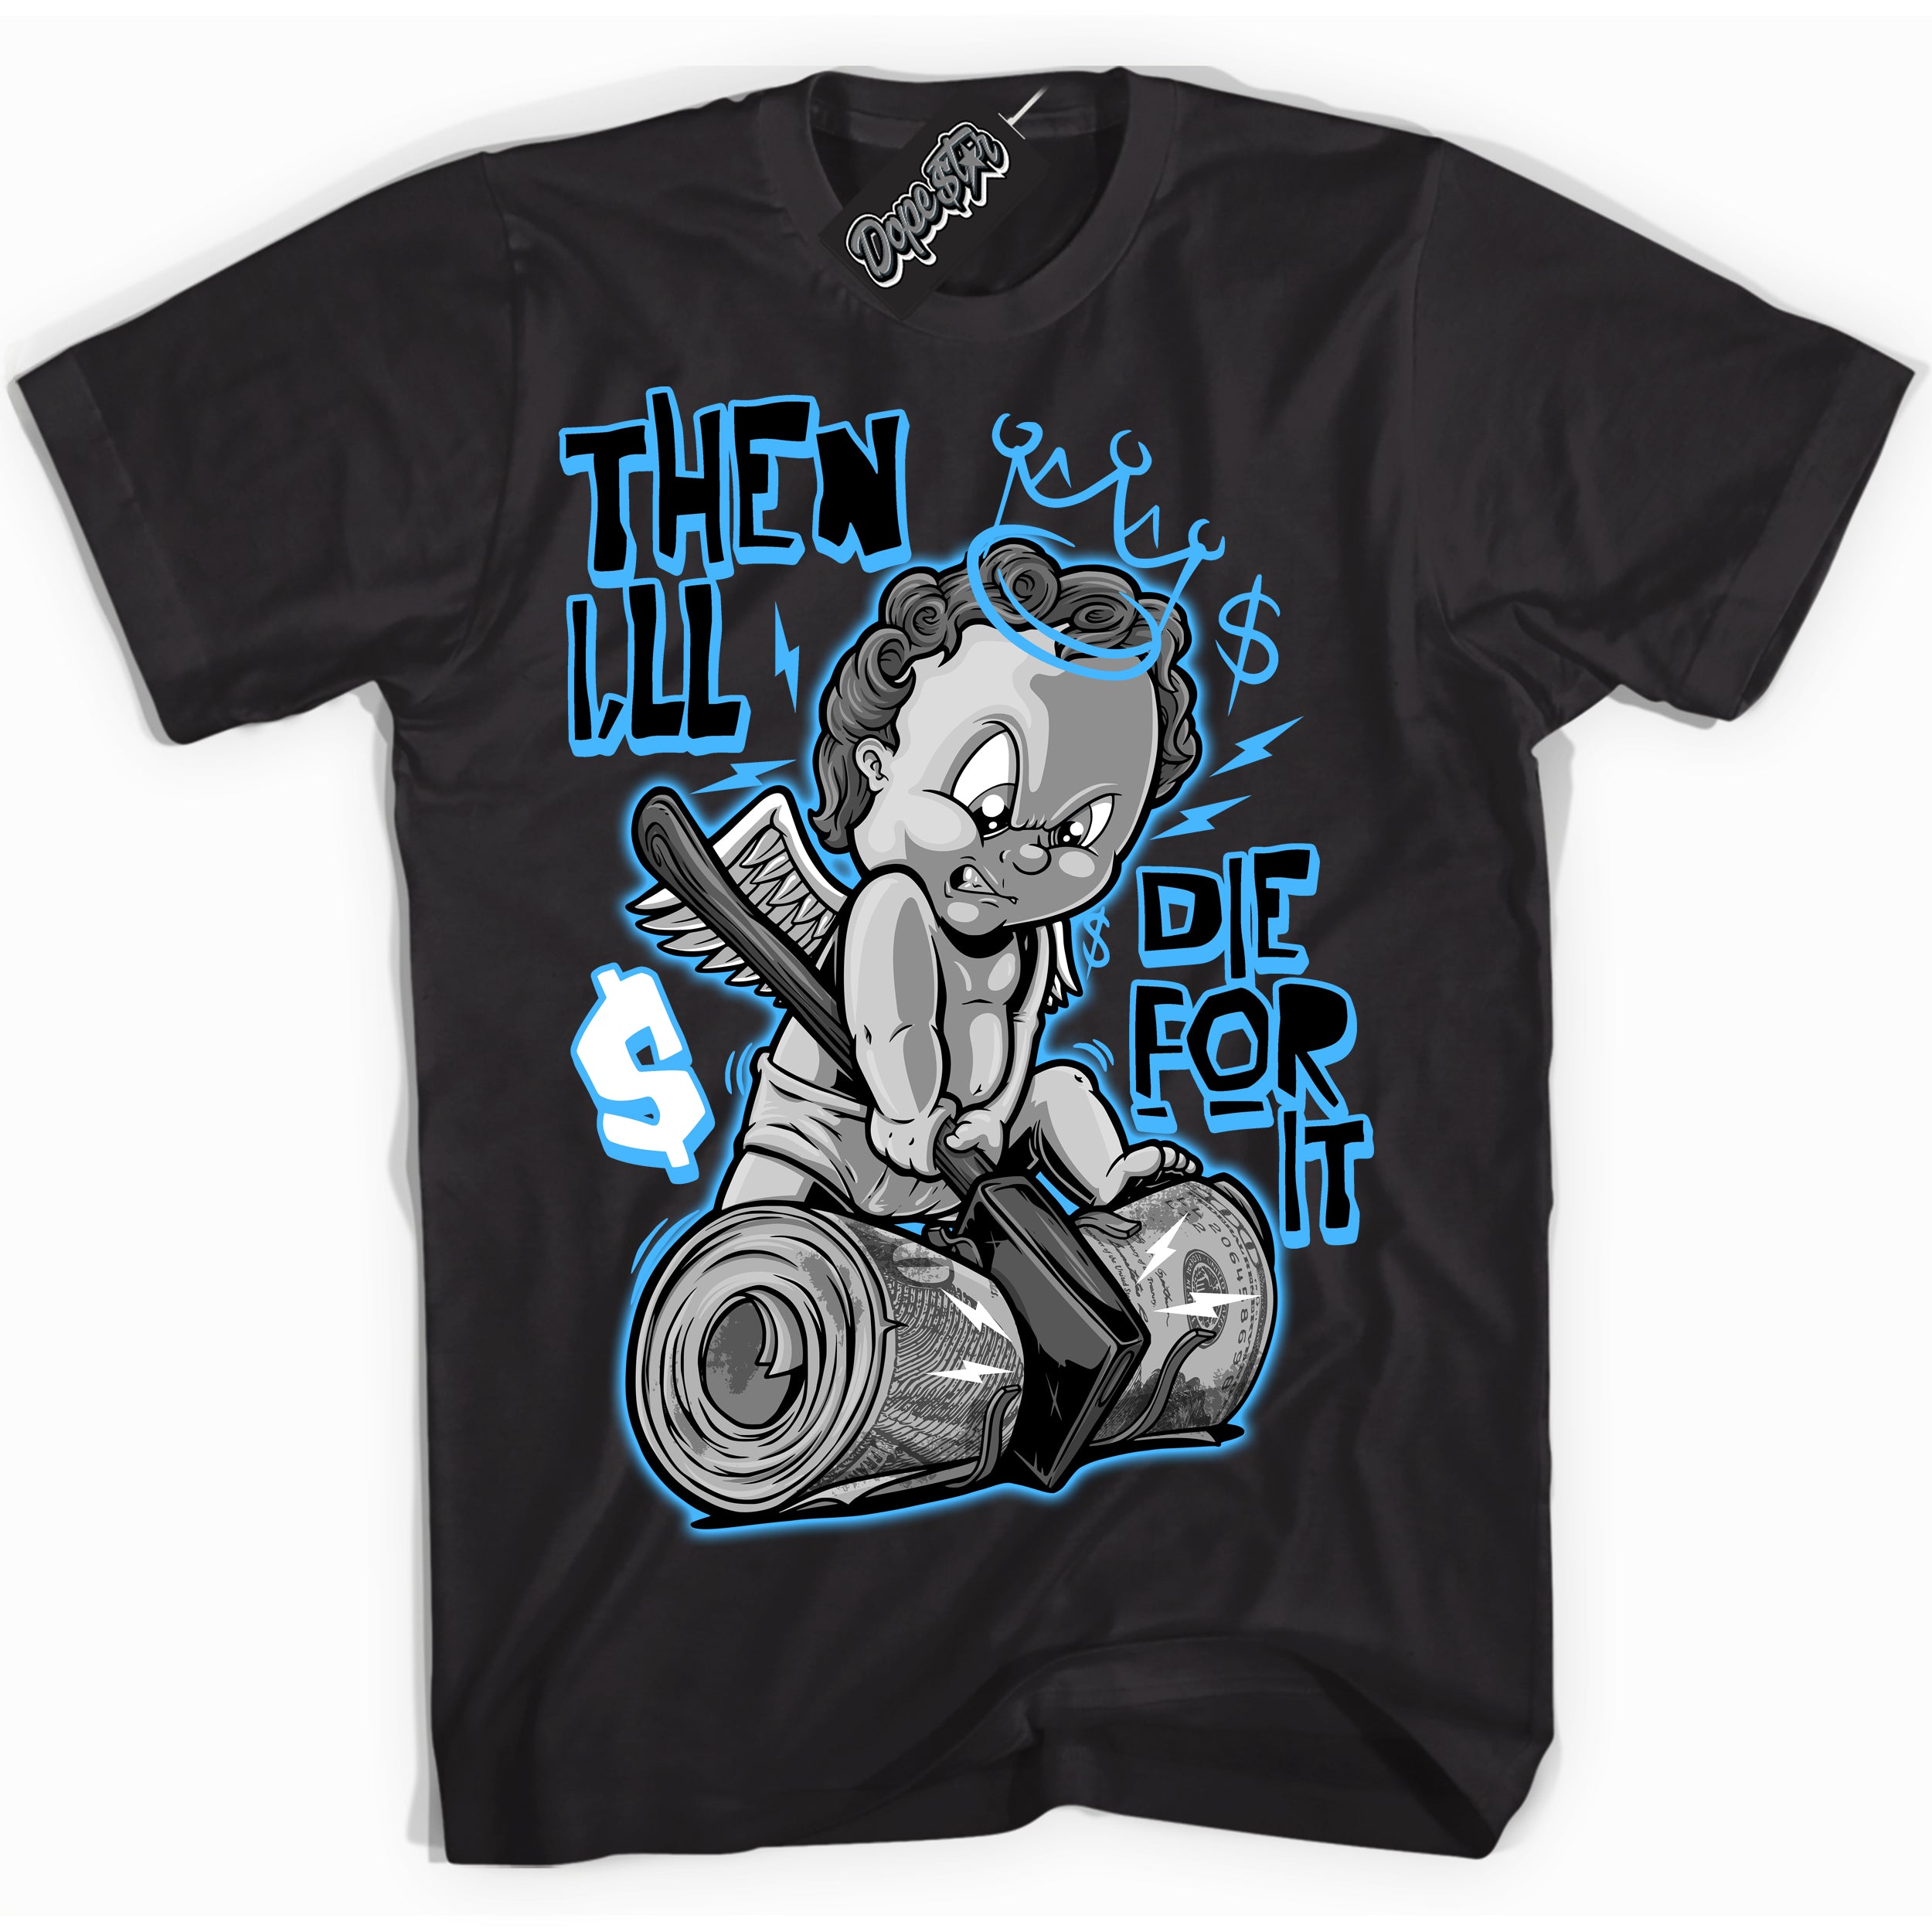 Cool Black graphic tee with “ Then I'll ” design, that perfectly matches Powder Blue 9s sneakers 